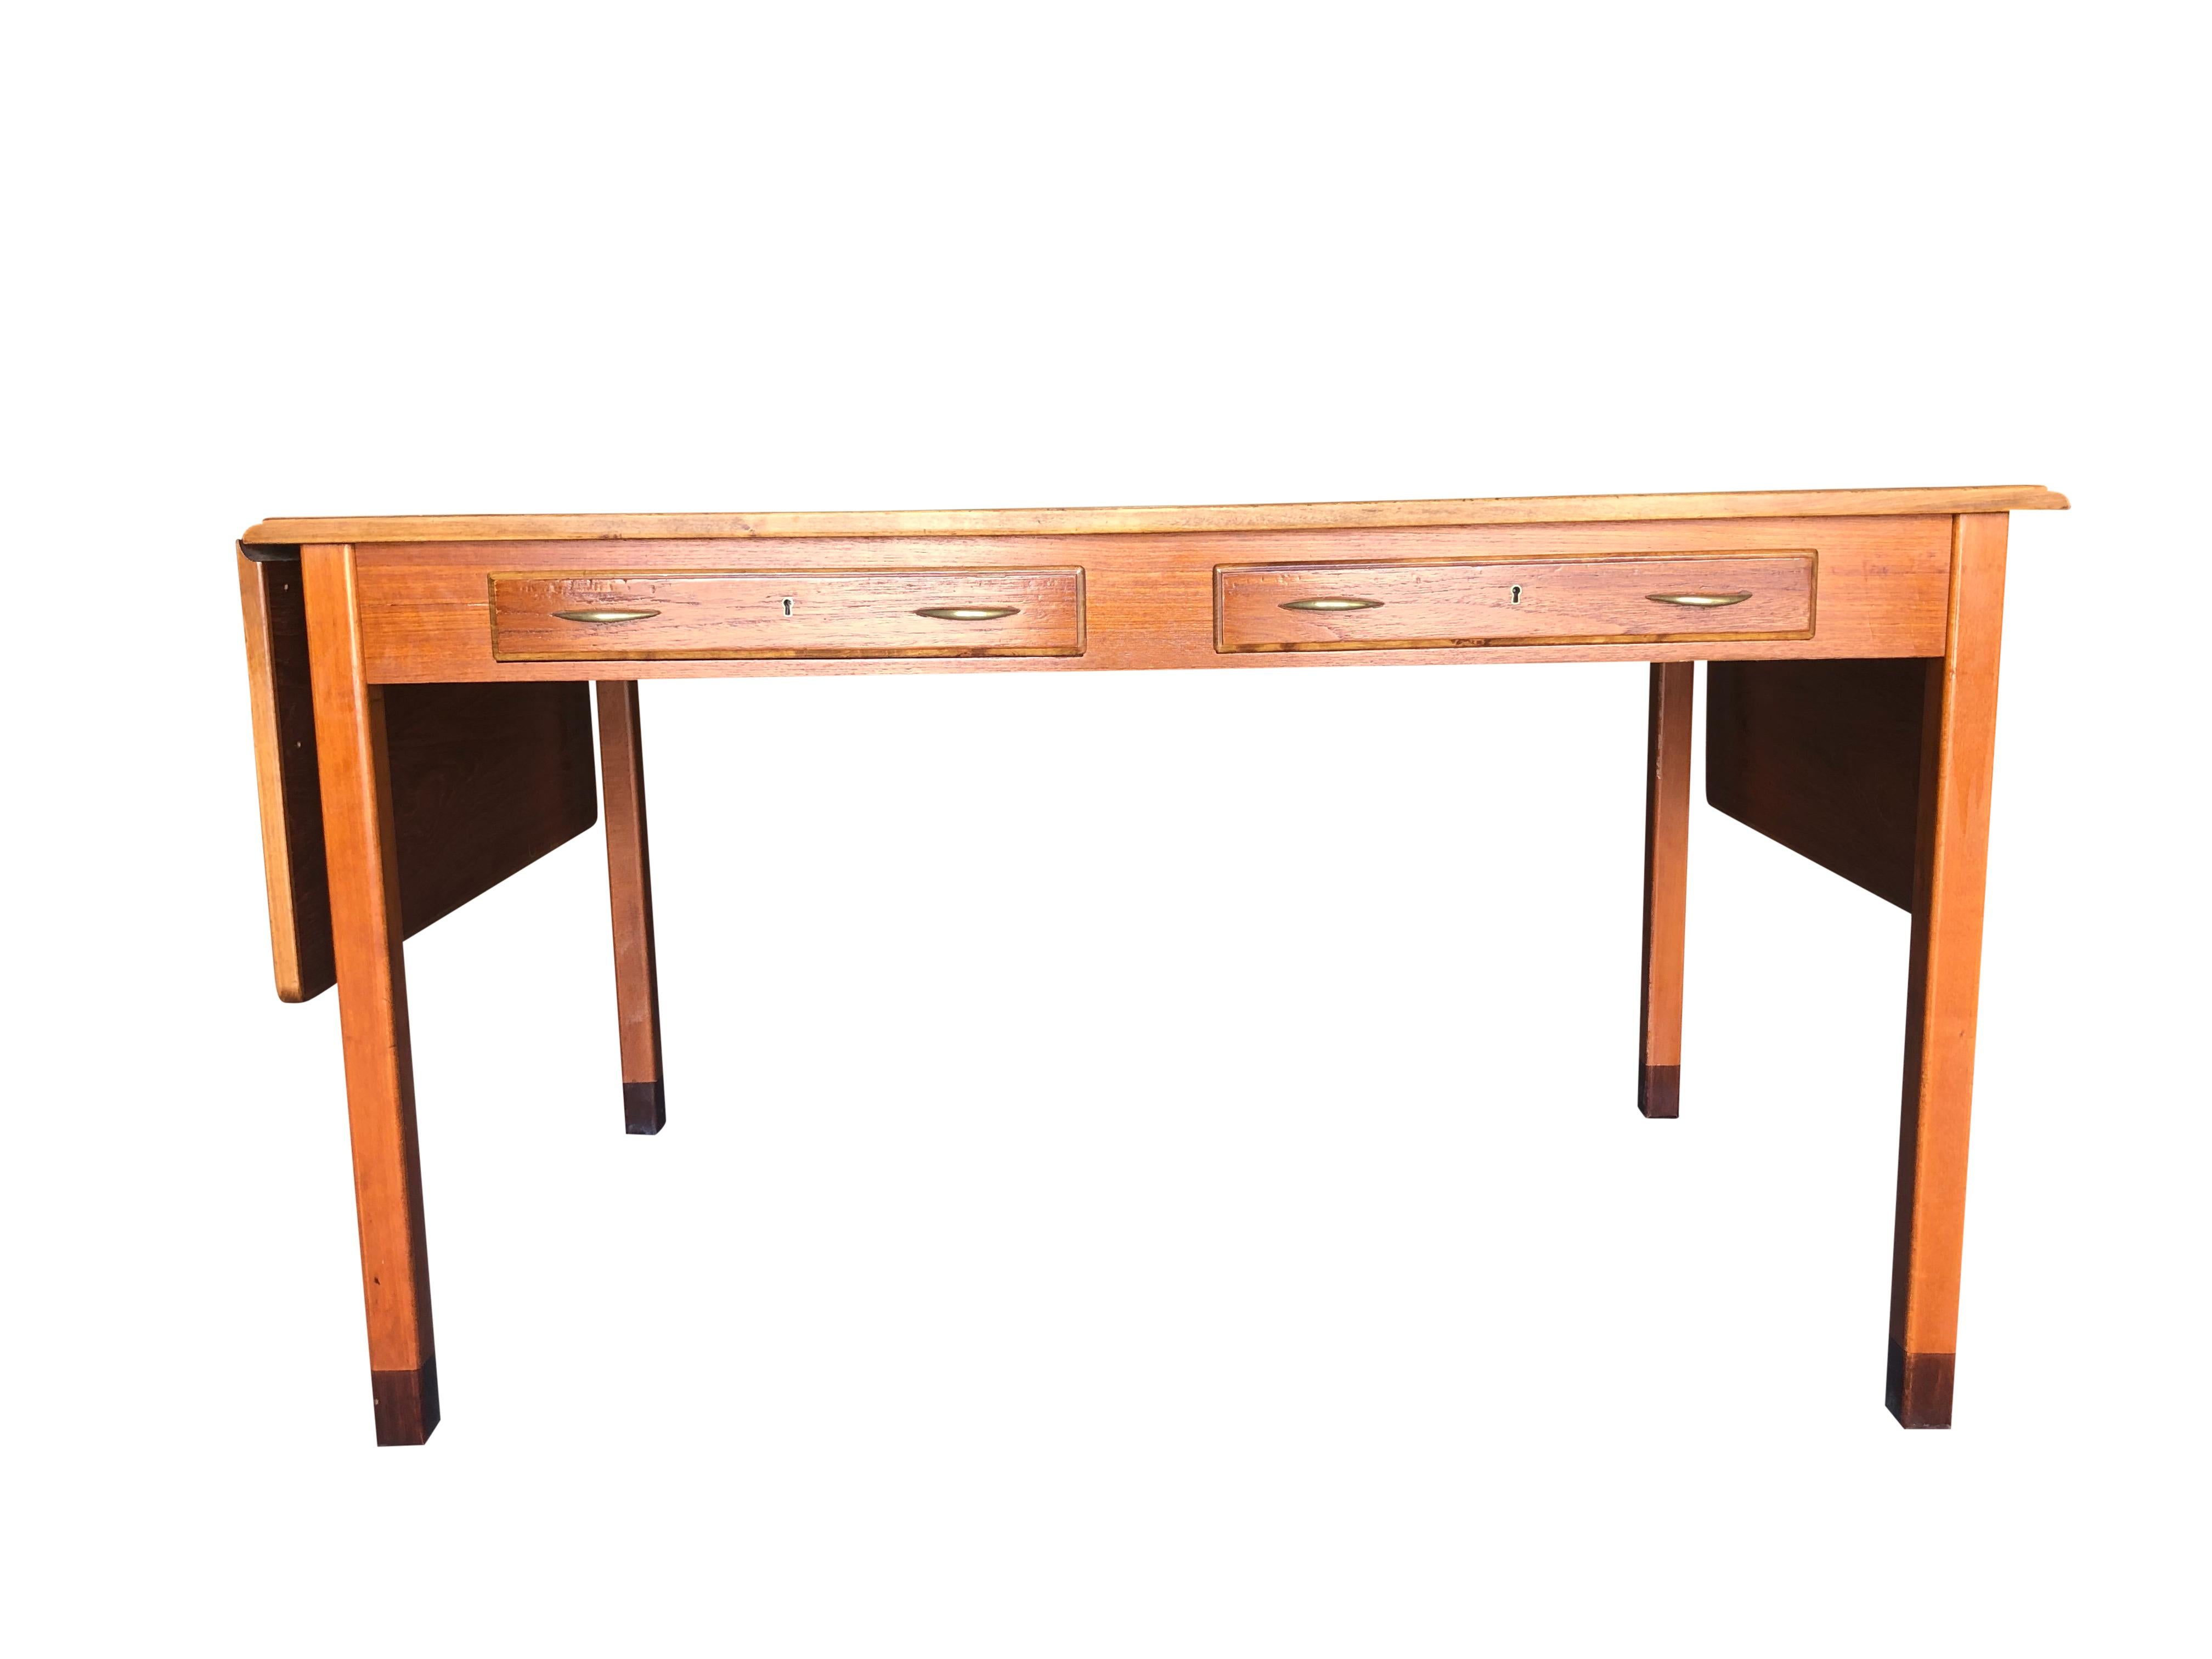 A vintage Mid-Century Modern Swedish writing desk, table or bureau plat designed by David Rosen, produced by Nordiska Kompaniet. This well designed piece of furniture with end extensions is made of hand crafted polished Teakwood, enhanced by brass